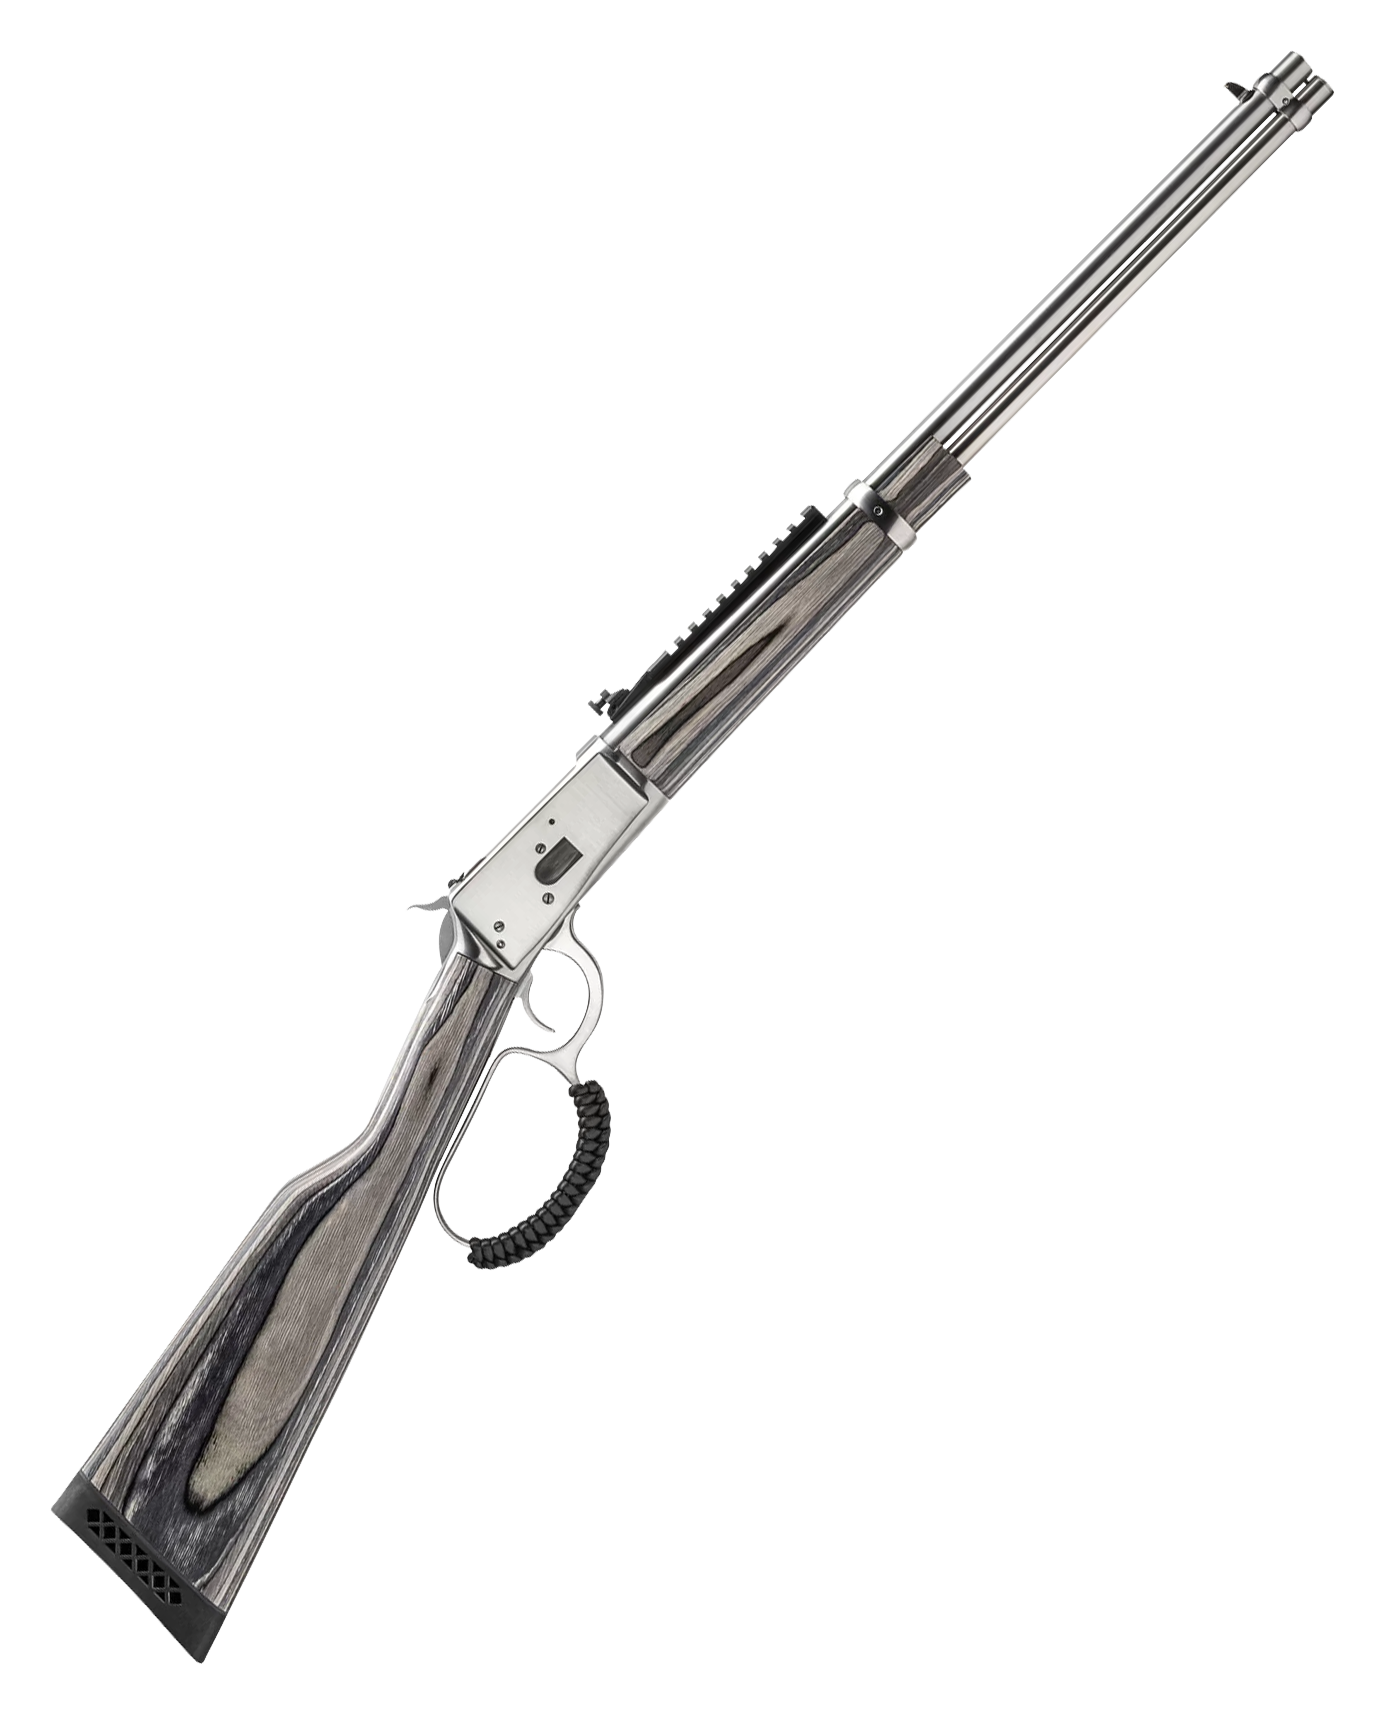 Rossi R92 Stainless .38/.357 Magnum